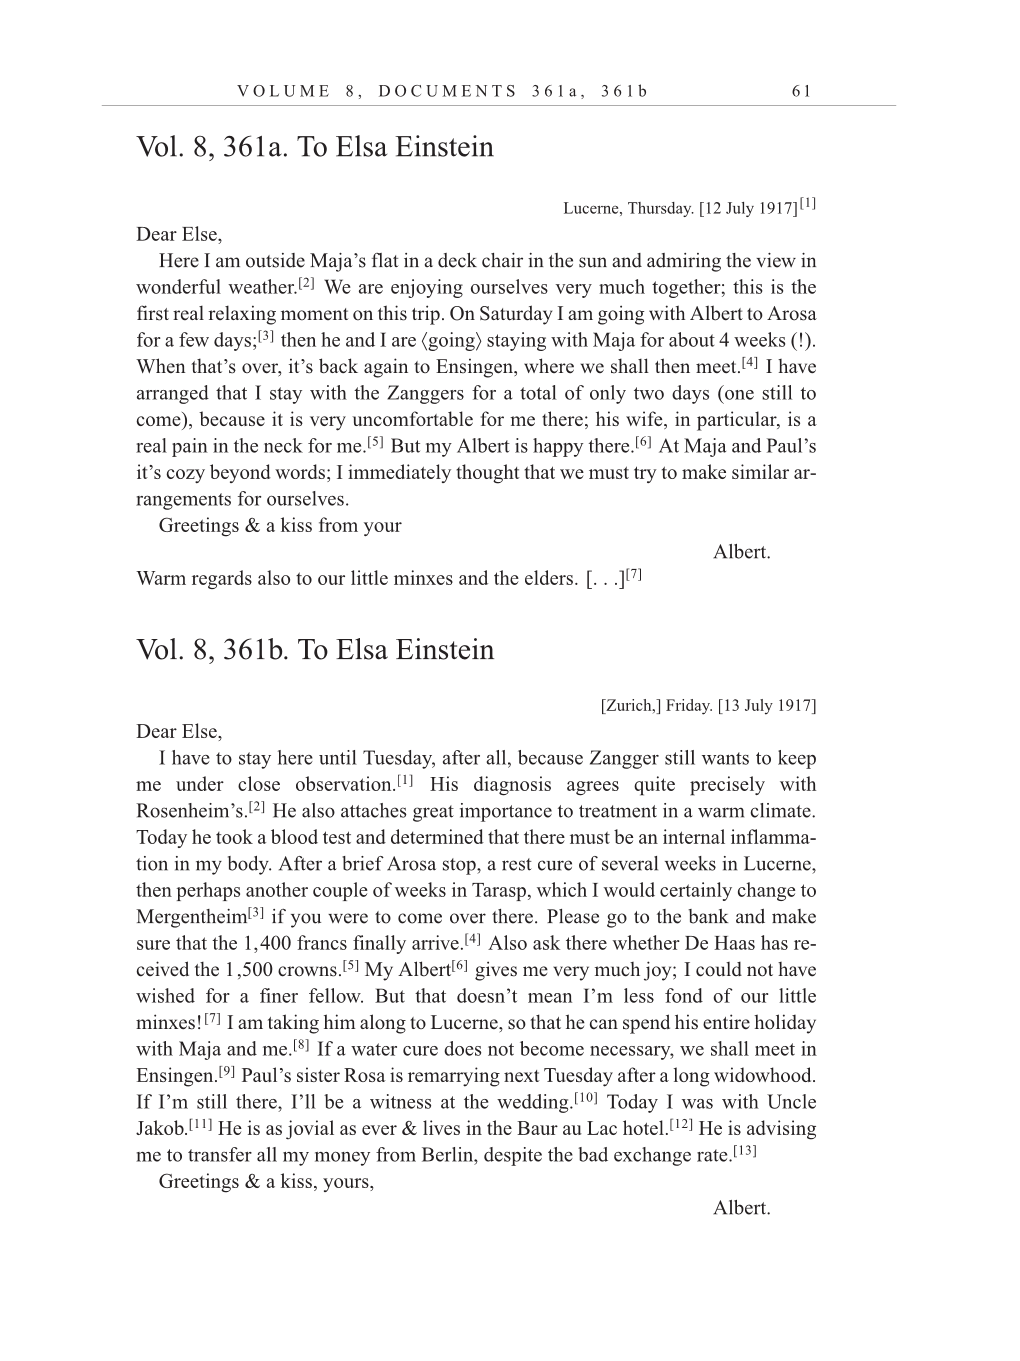 Volume 10: The Berlin Years: Correspondence, May-December 1920, and Supplementary Correspondence, 1909-1920 (English translation supplement) page 61